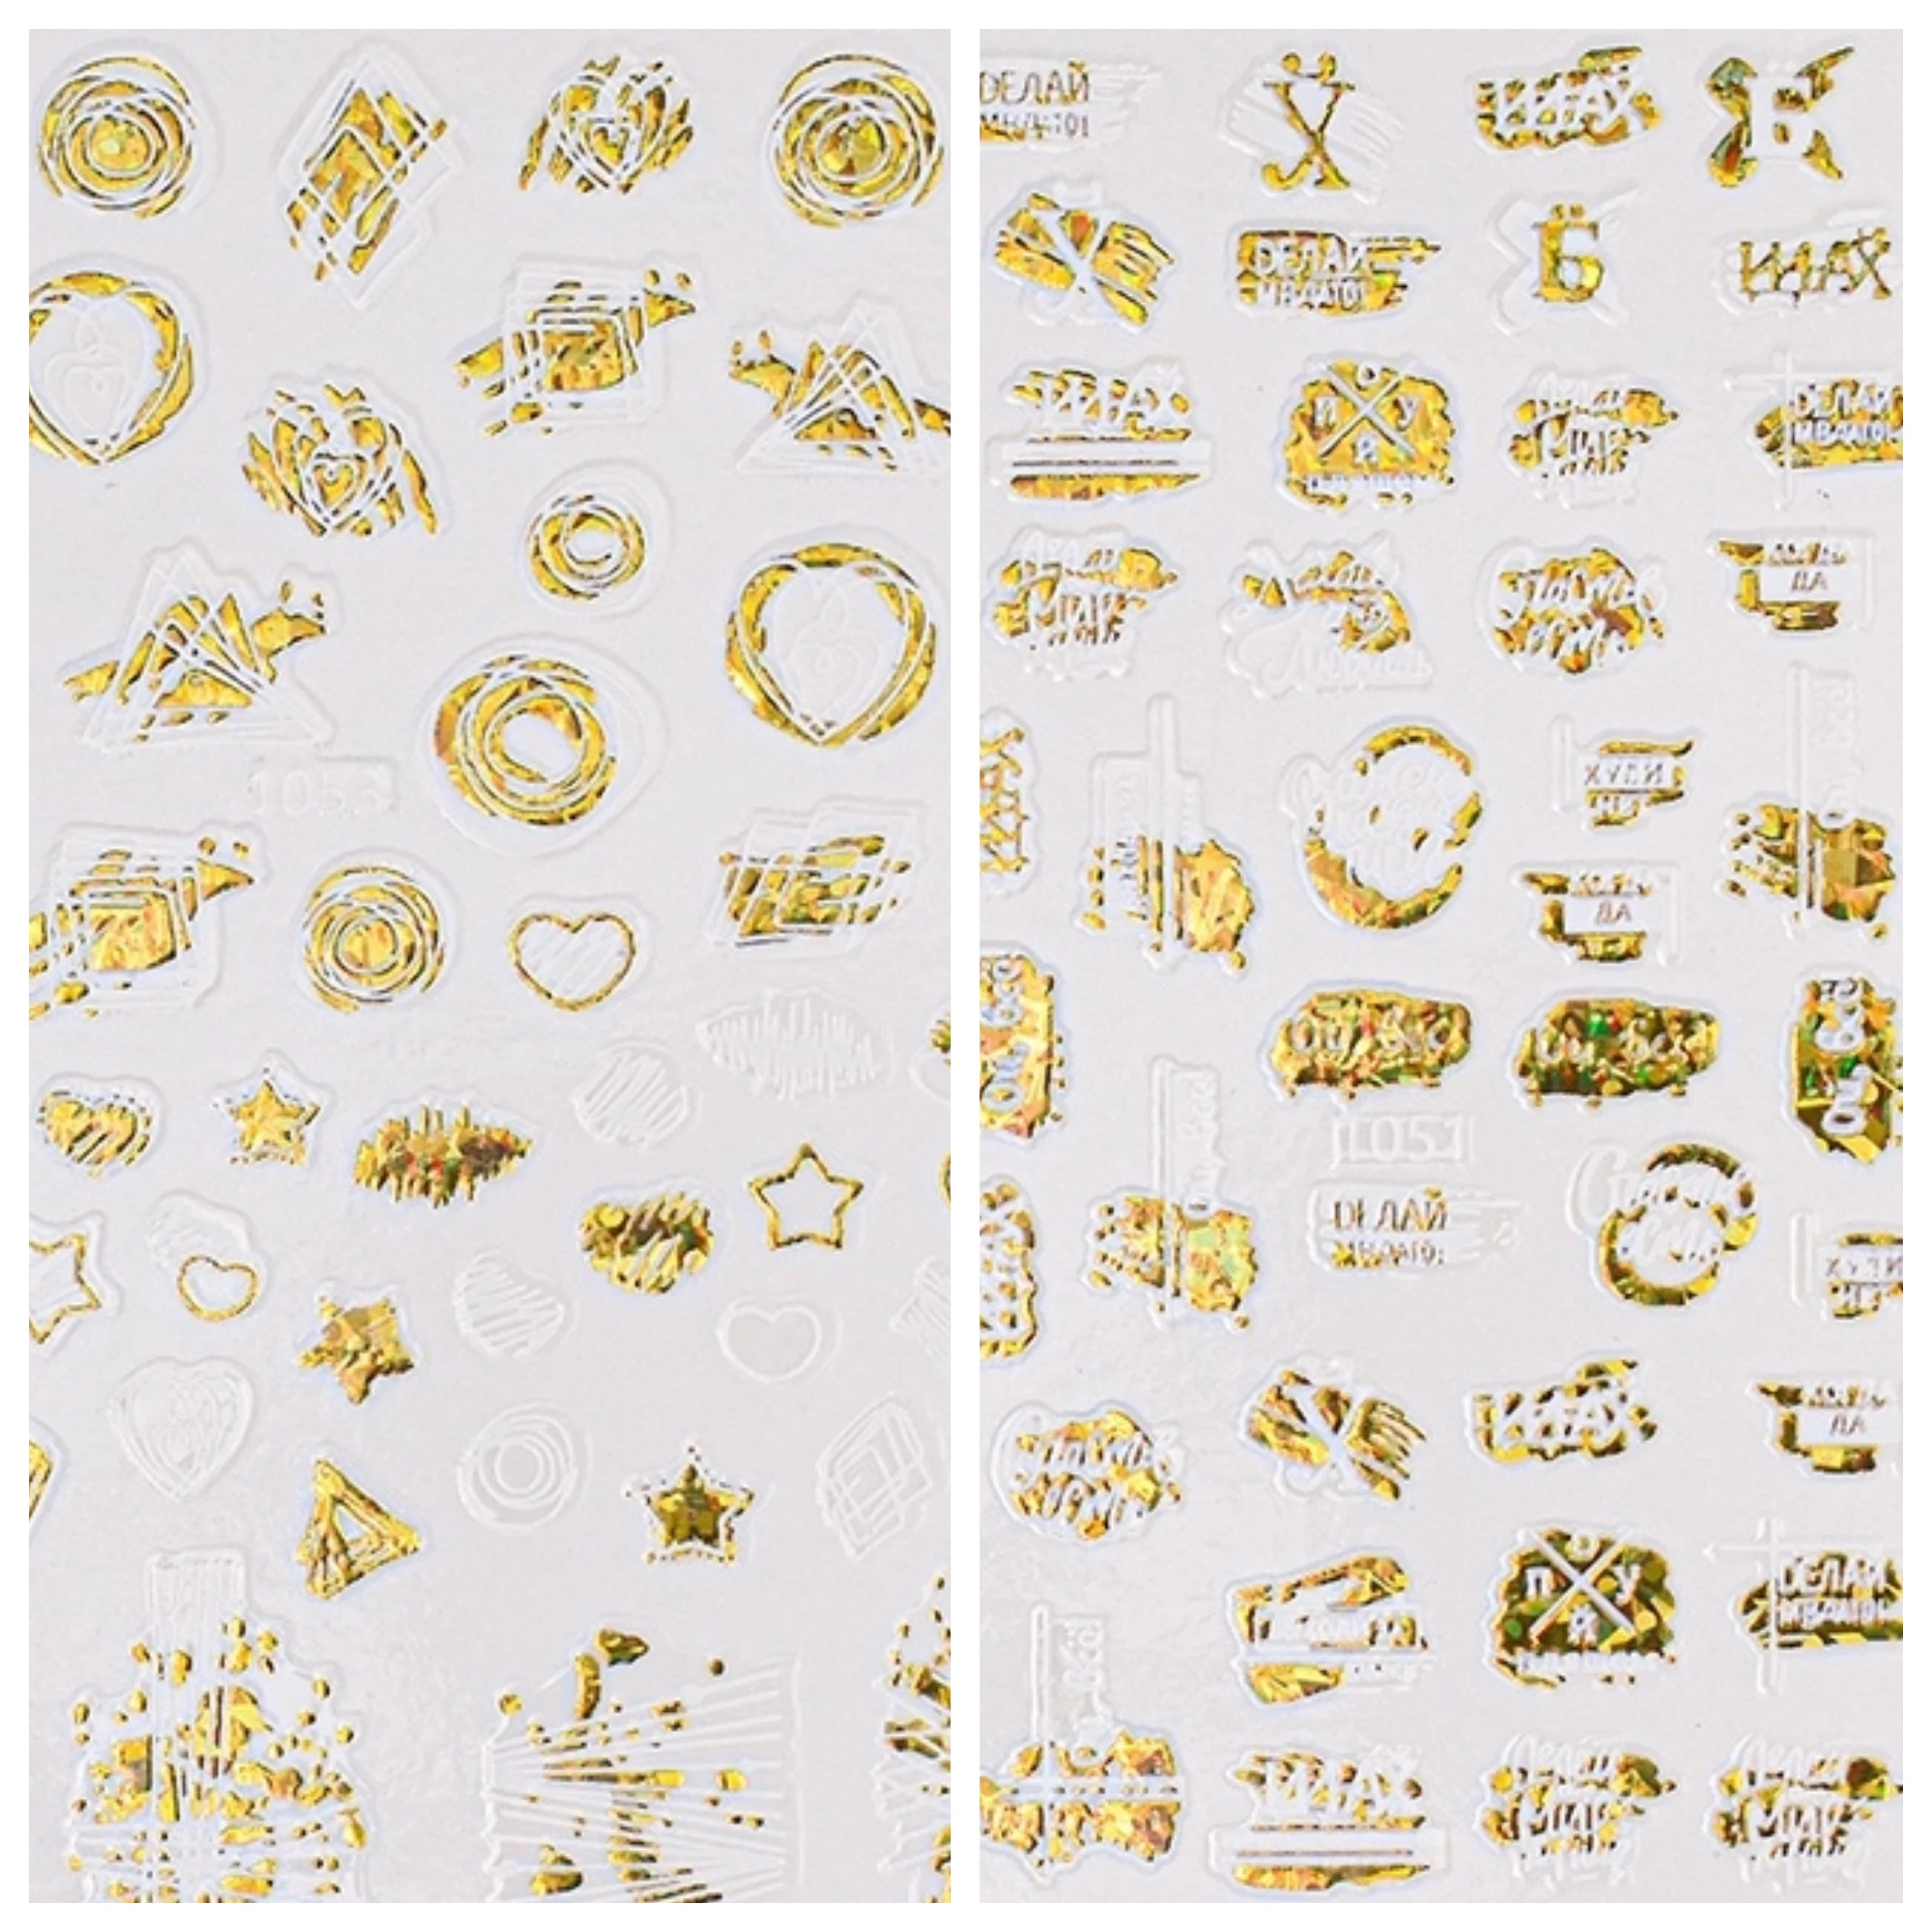 

Beach sandals nail sticker Designer nail stickers smiley face 3D gold foil leaf flower waterproof semi cured gel nail sticker uv, Picture shown